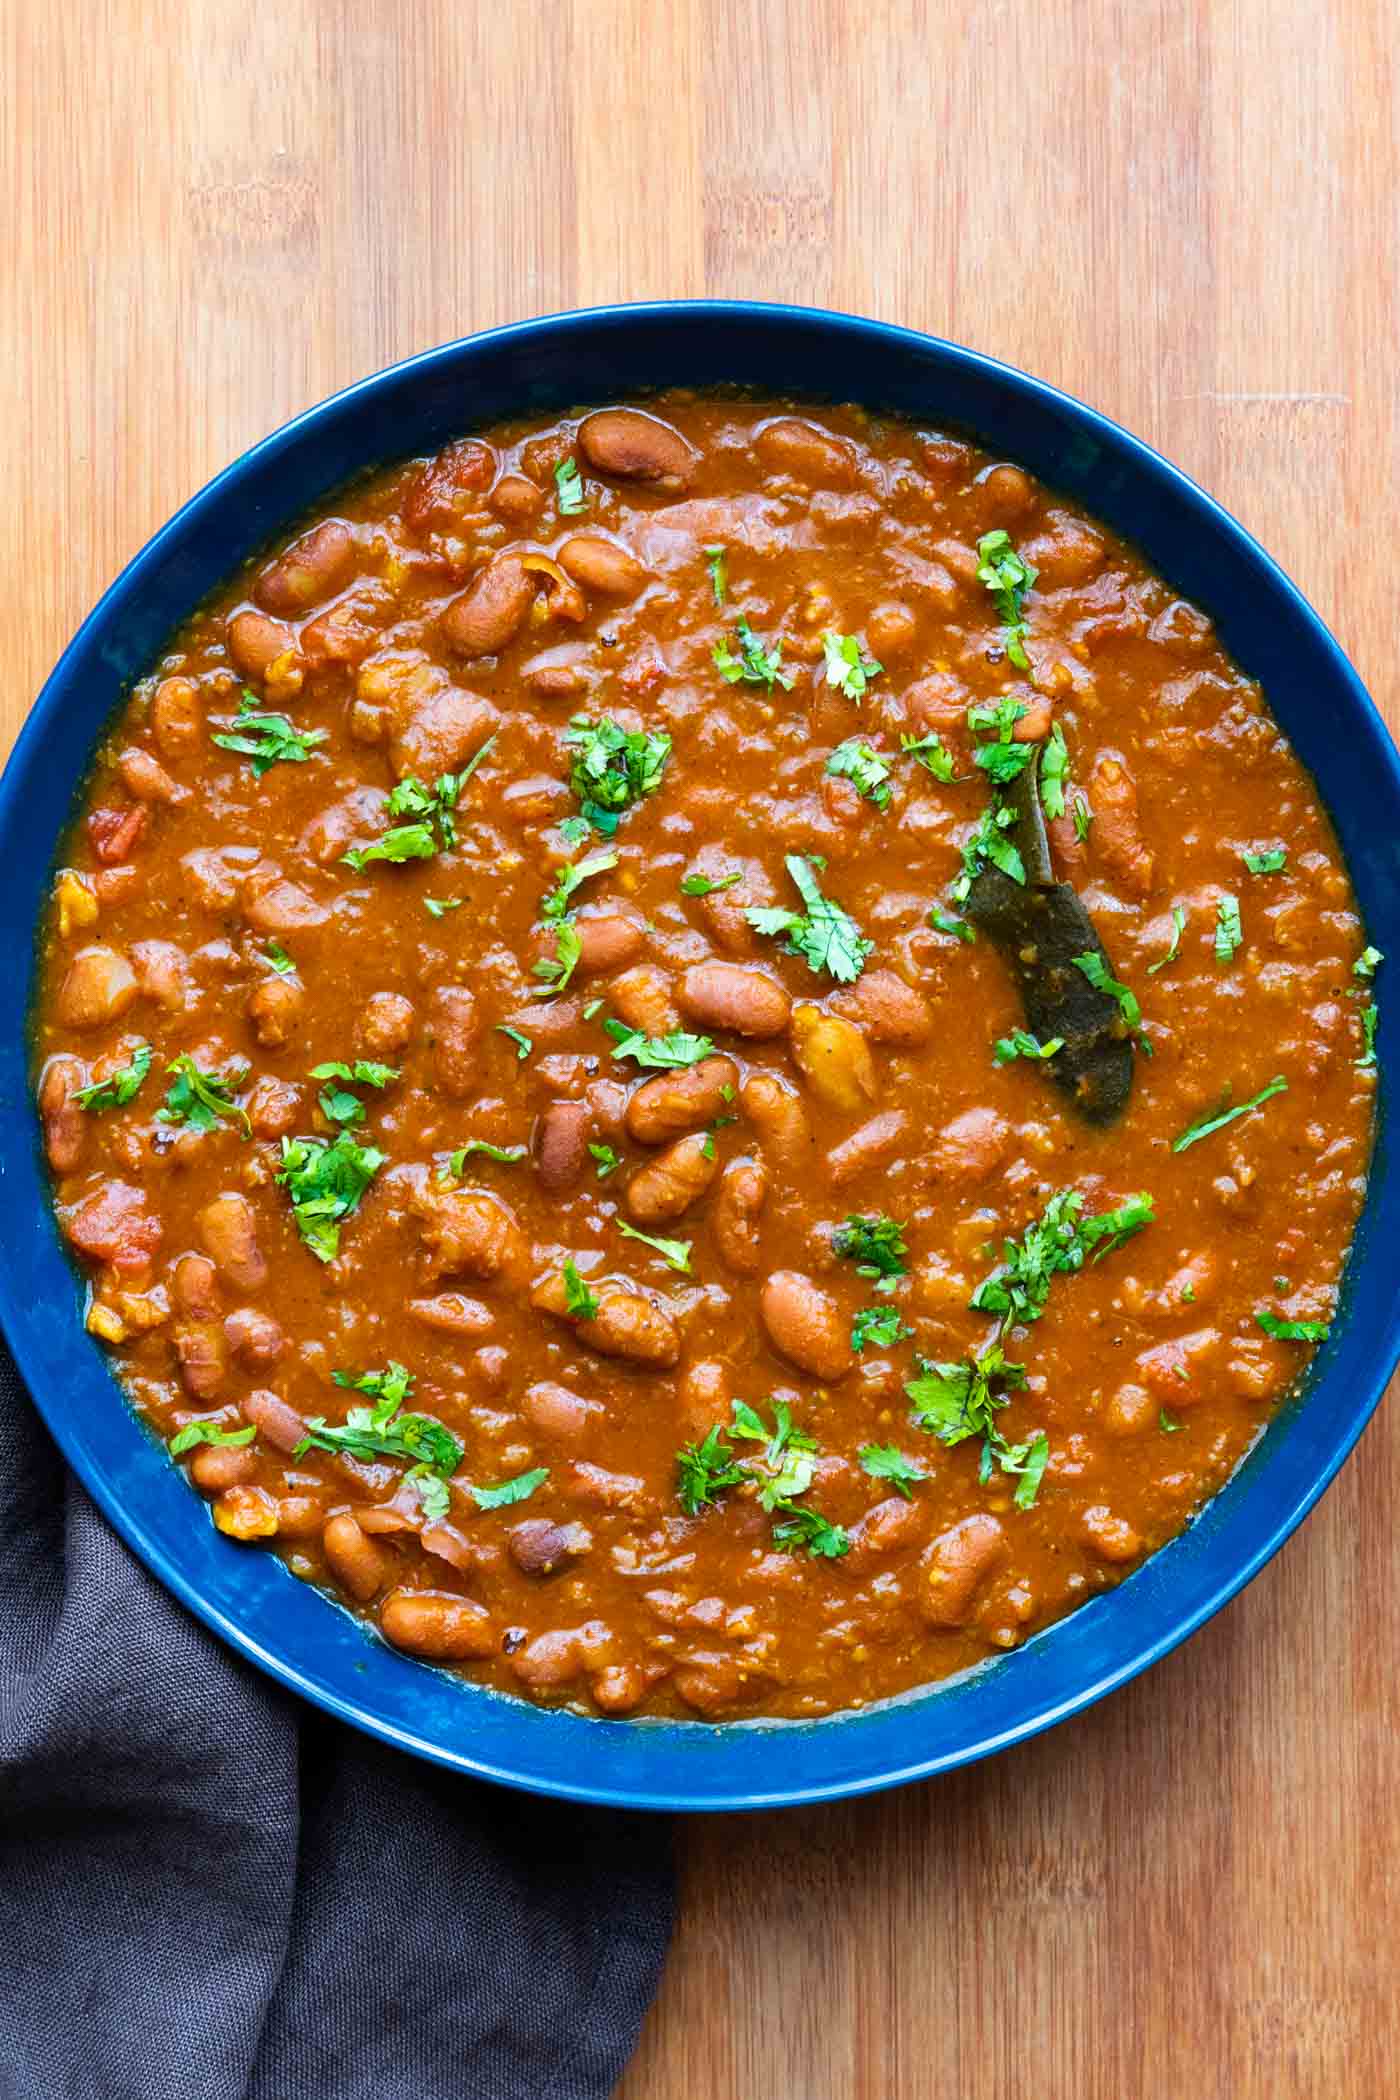 Rajma Masala served in a blue bowl with chopped coriander sprinkled over